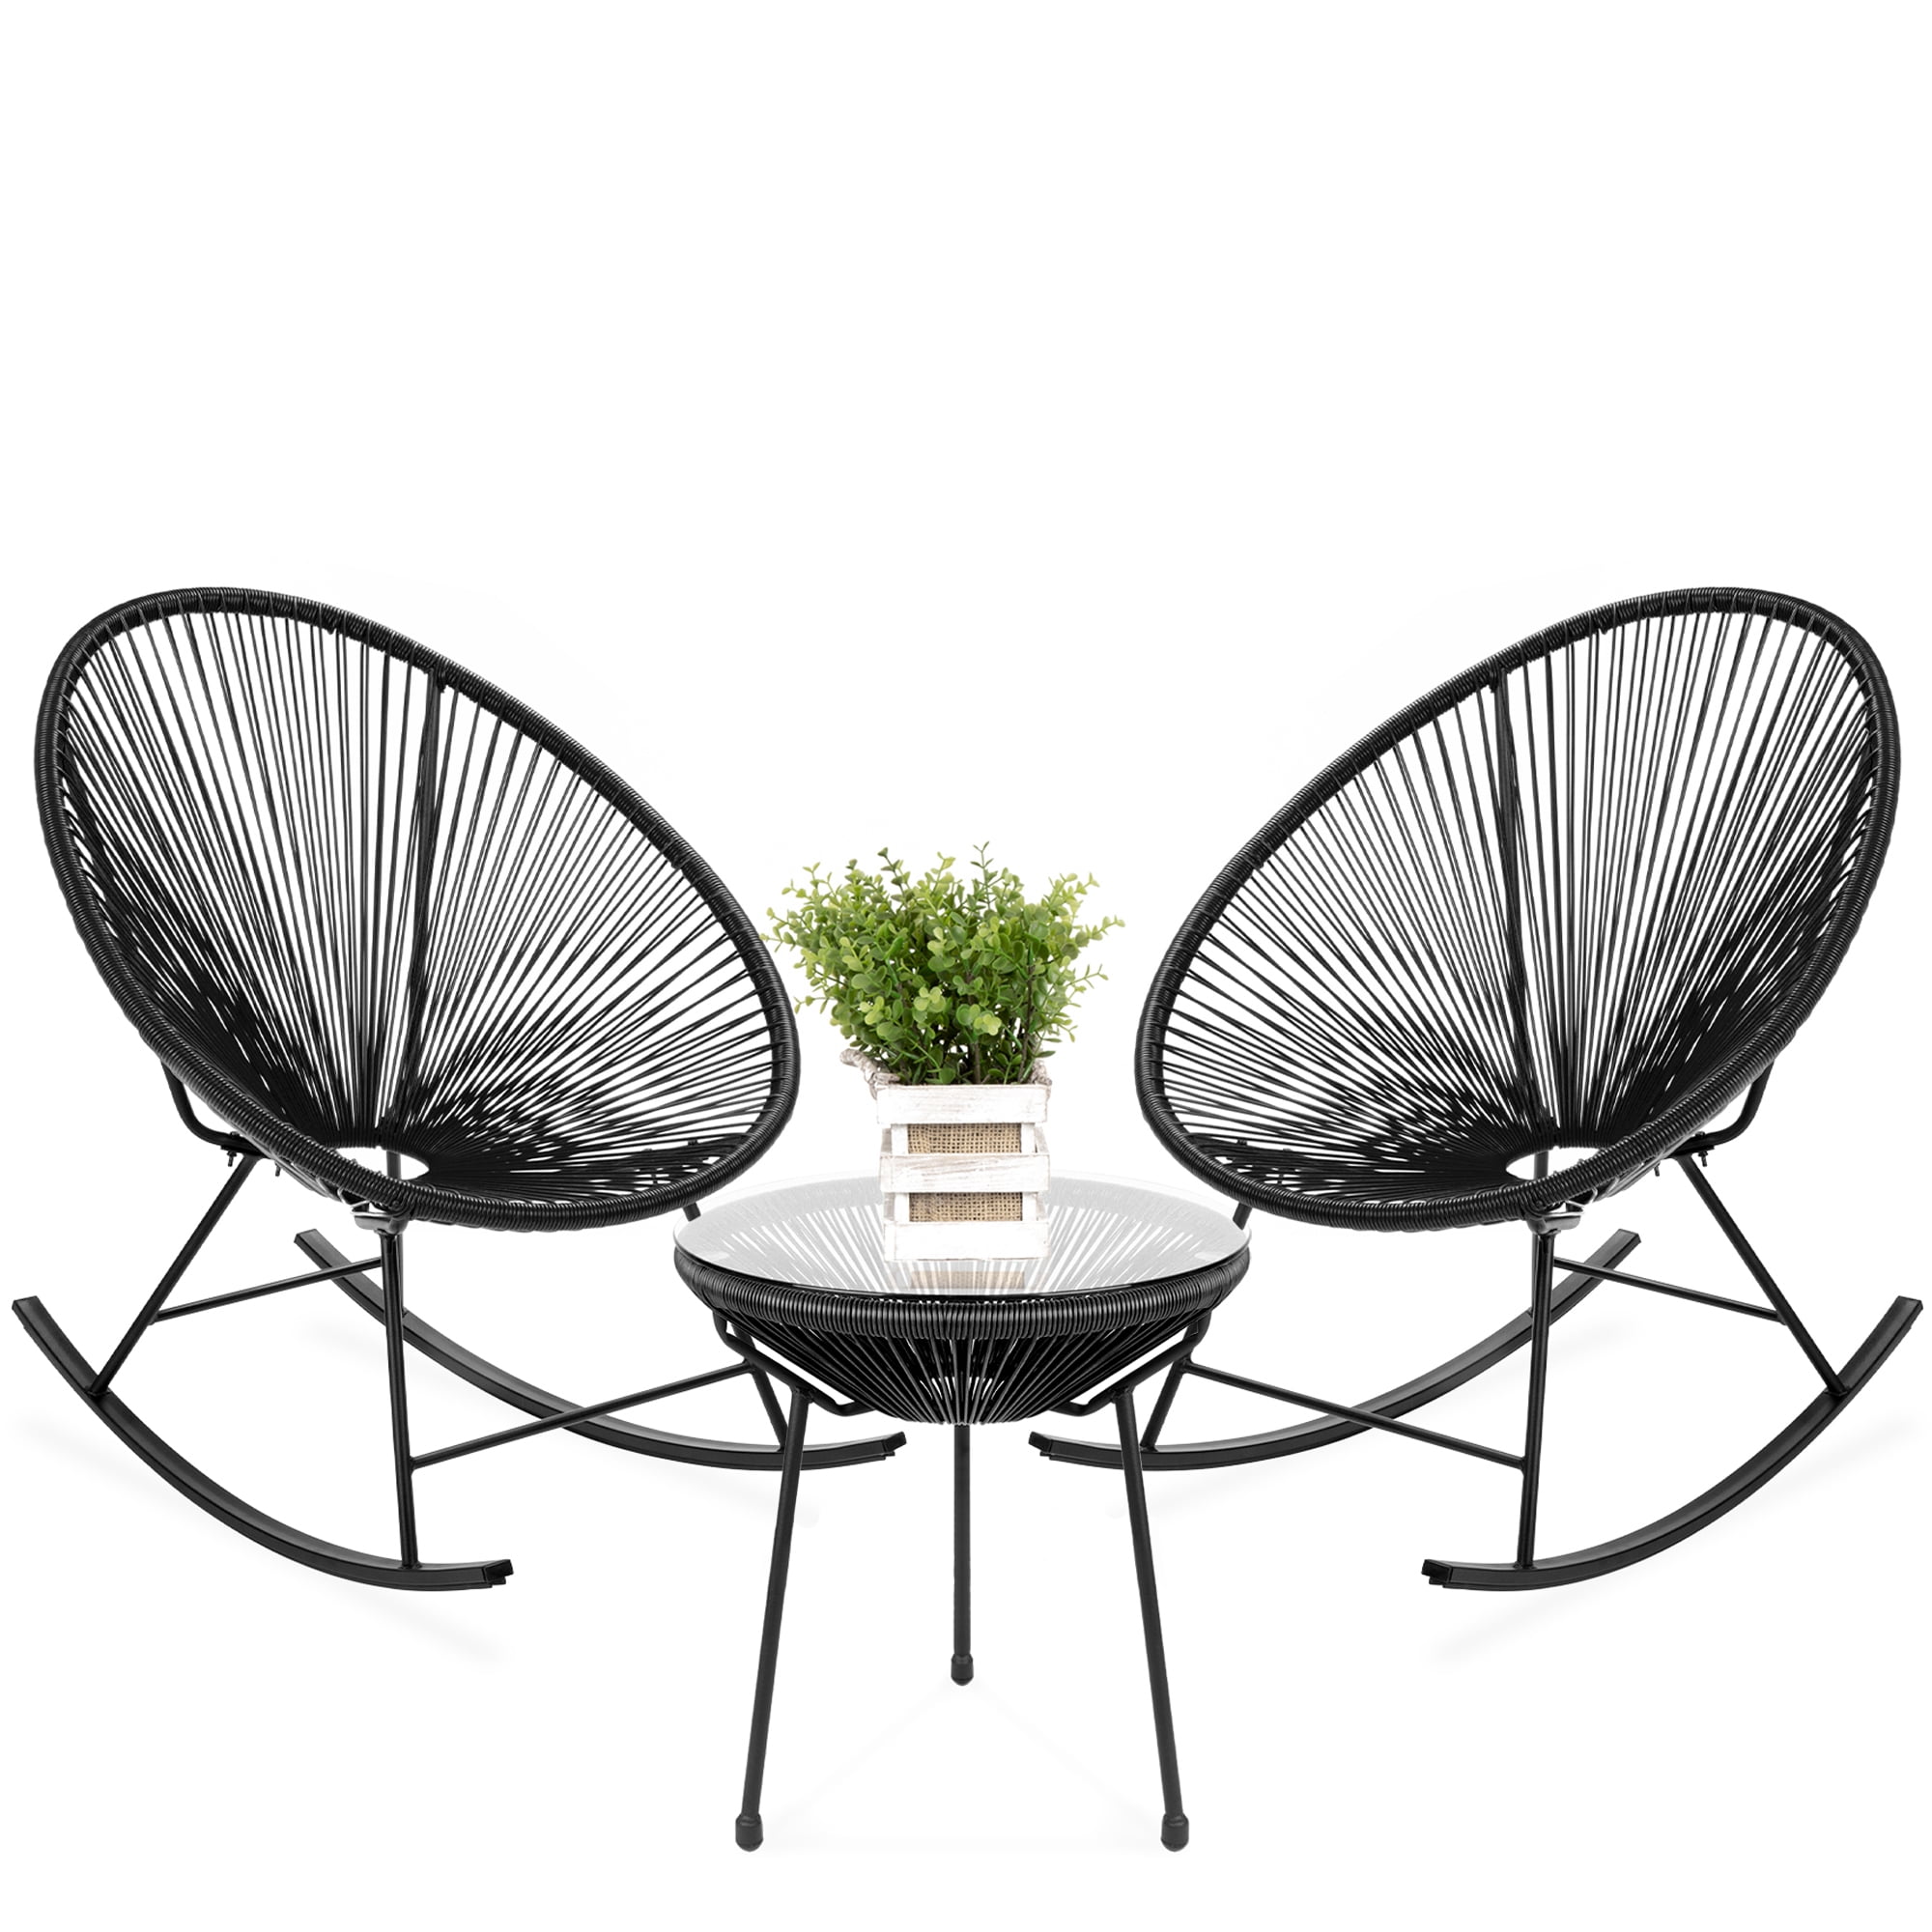 Best Choice Products 3-Piece All-Weather Patio Woven Rope Acapulco Bistro Furniture Set with Rocking Chairs, Table - Black